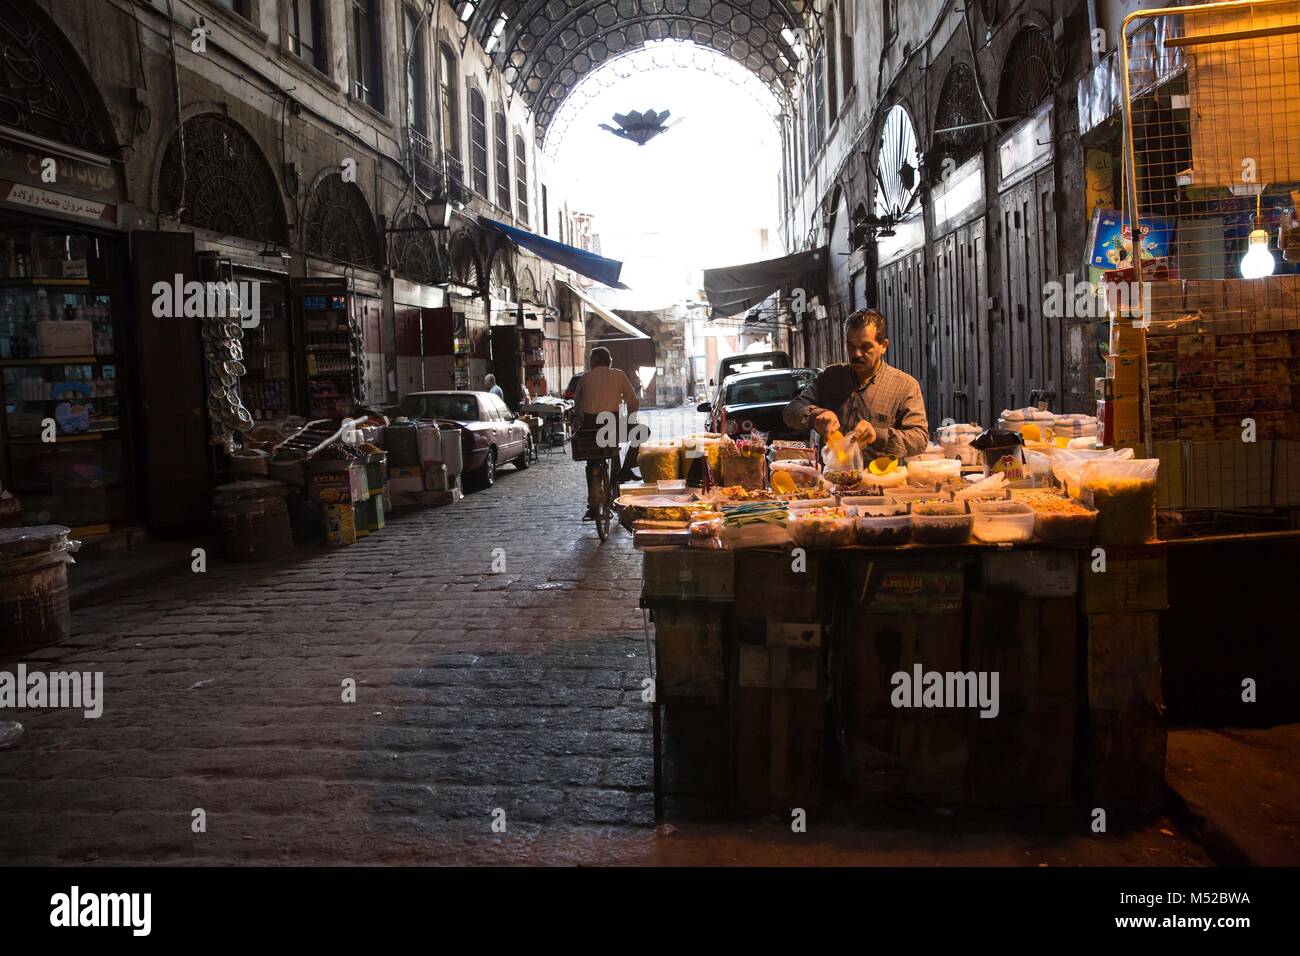 A man sells goods in Al-Hamidiyah Souq, in the old city of Damascus. Despite the ongoing conflict in Syria, life in government-held parts of Damascus still carries on relatively peacefully. Damascus, the capital city of war-torn Syria, is mostly under control by the official Syrian government led by president Bashar al-Assad. Stock Photo